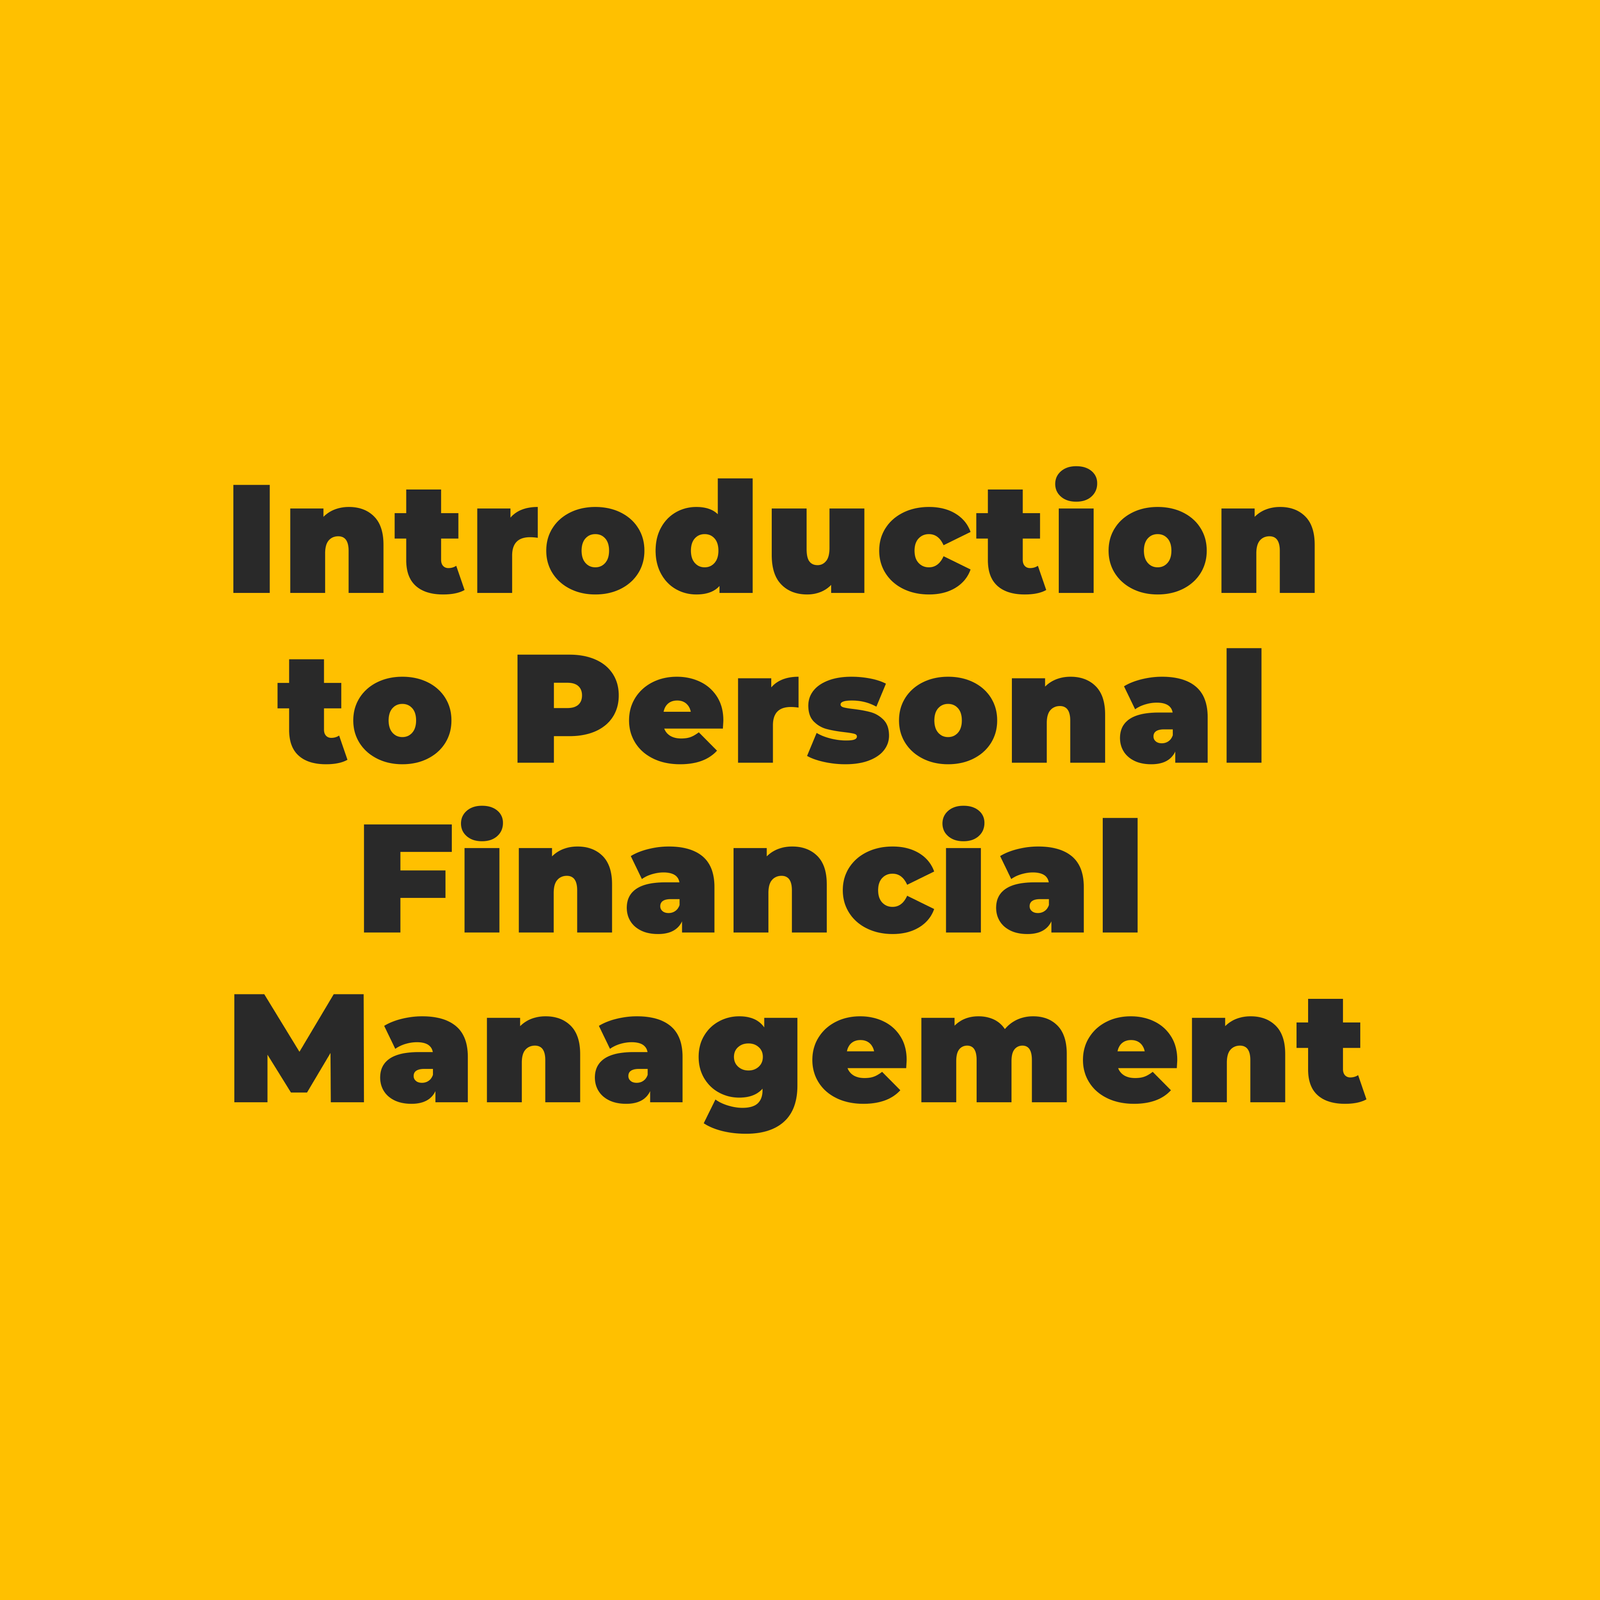 Introduction to Personal Financial Management